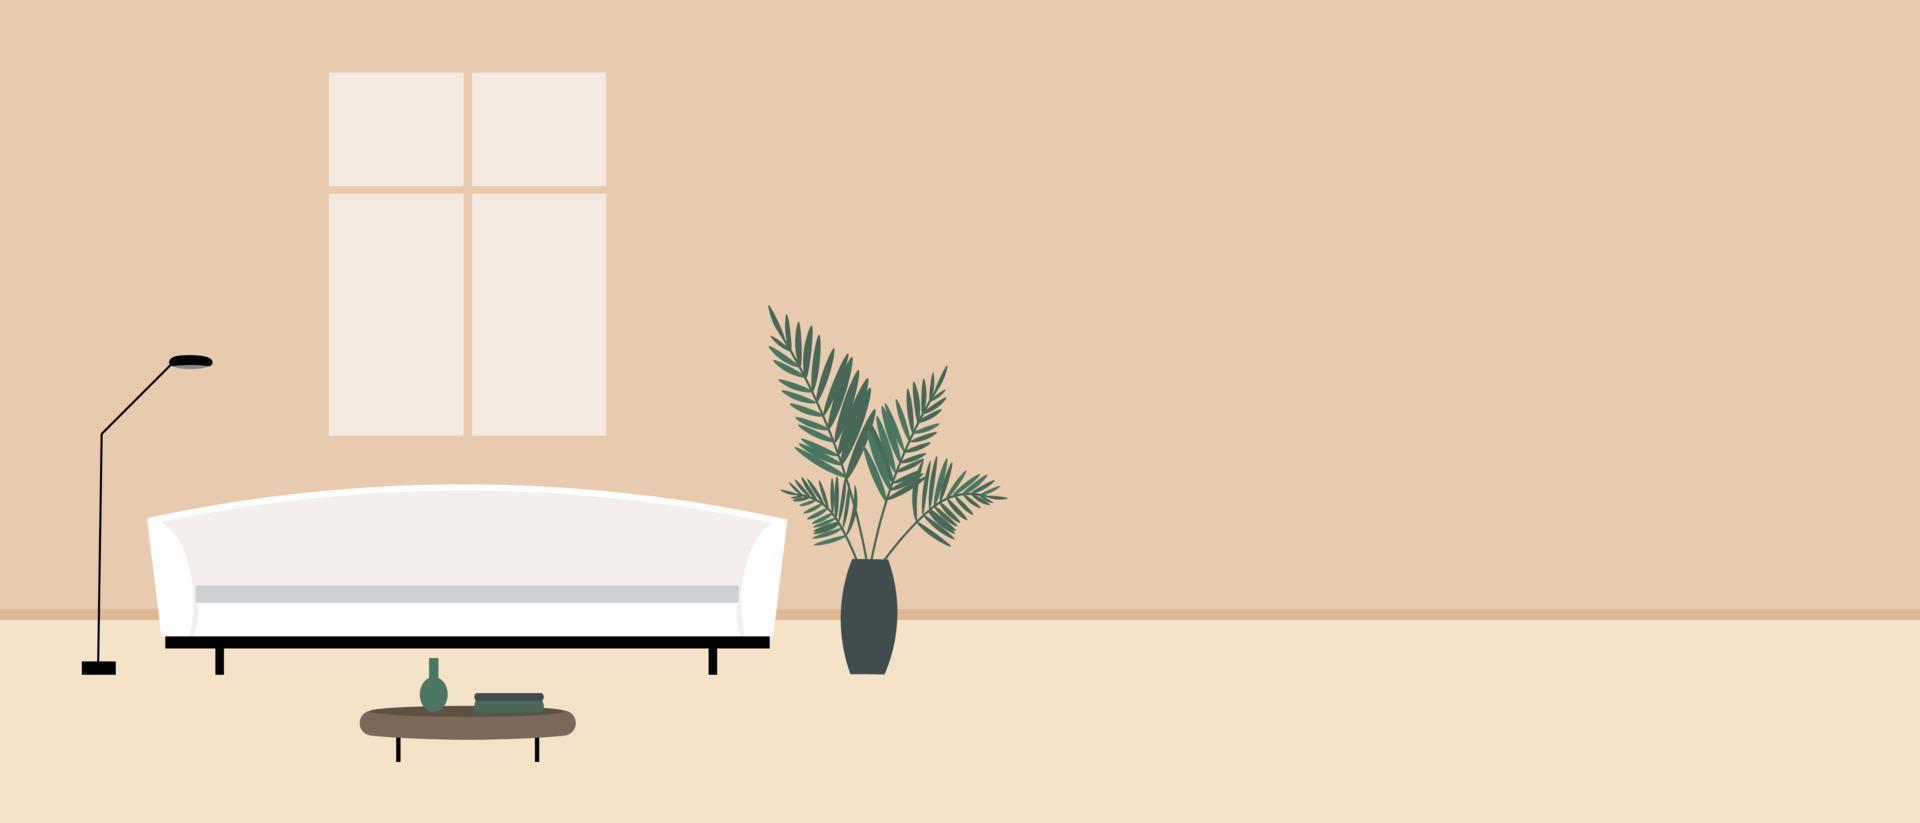 Living room without people. Copy space template. Modern living space without people. Flat vector illustration. Room with white sofa, coffee table, lamp, potted plant, window. Illustration for design